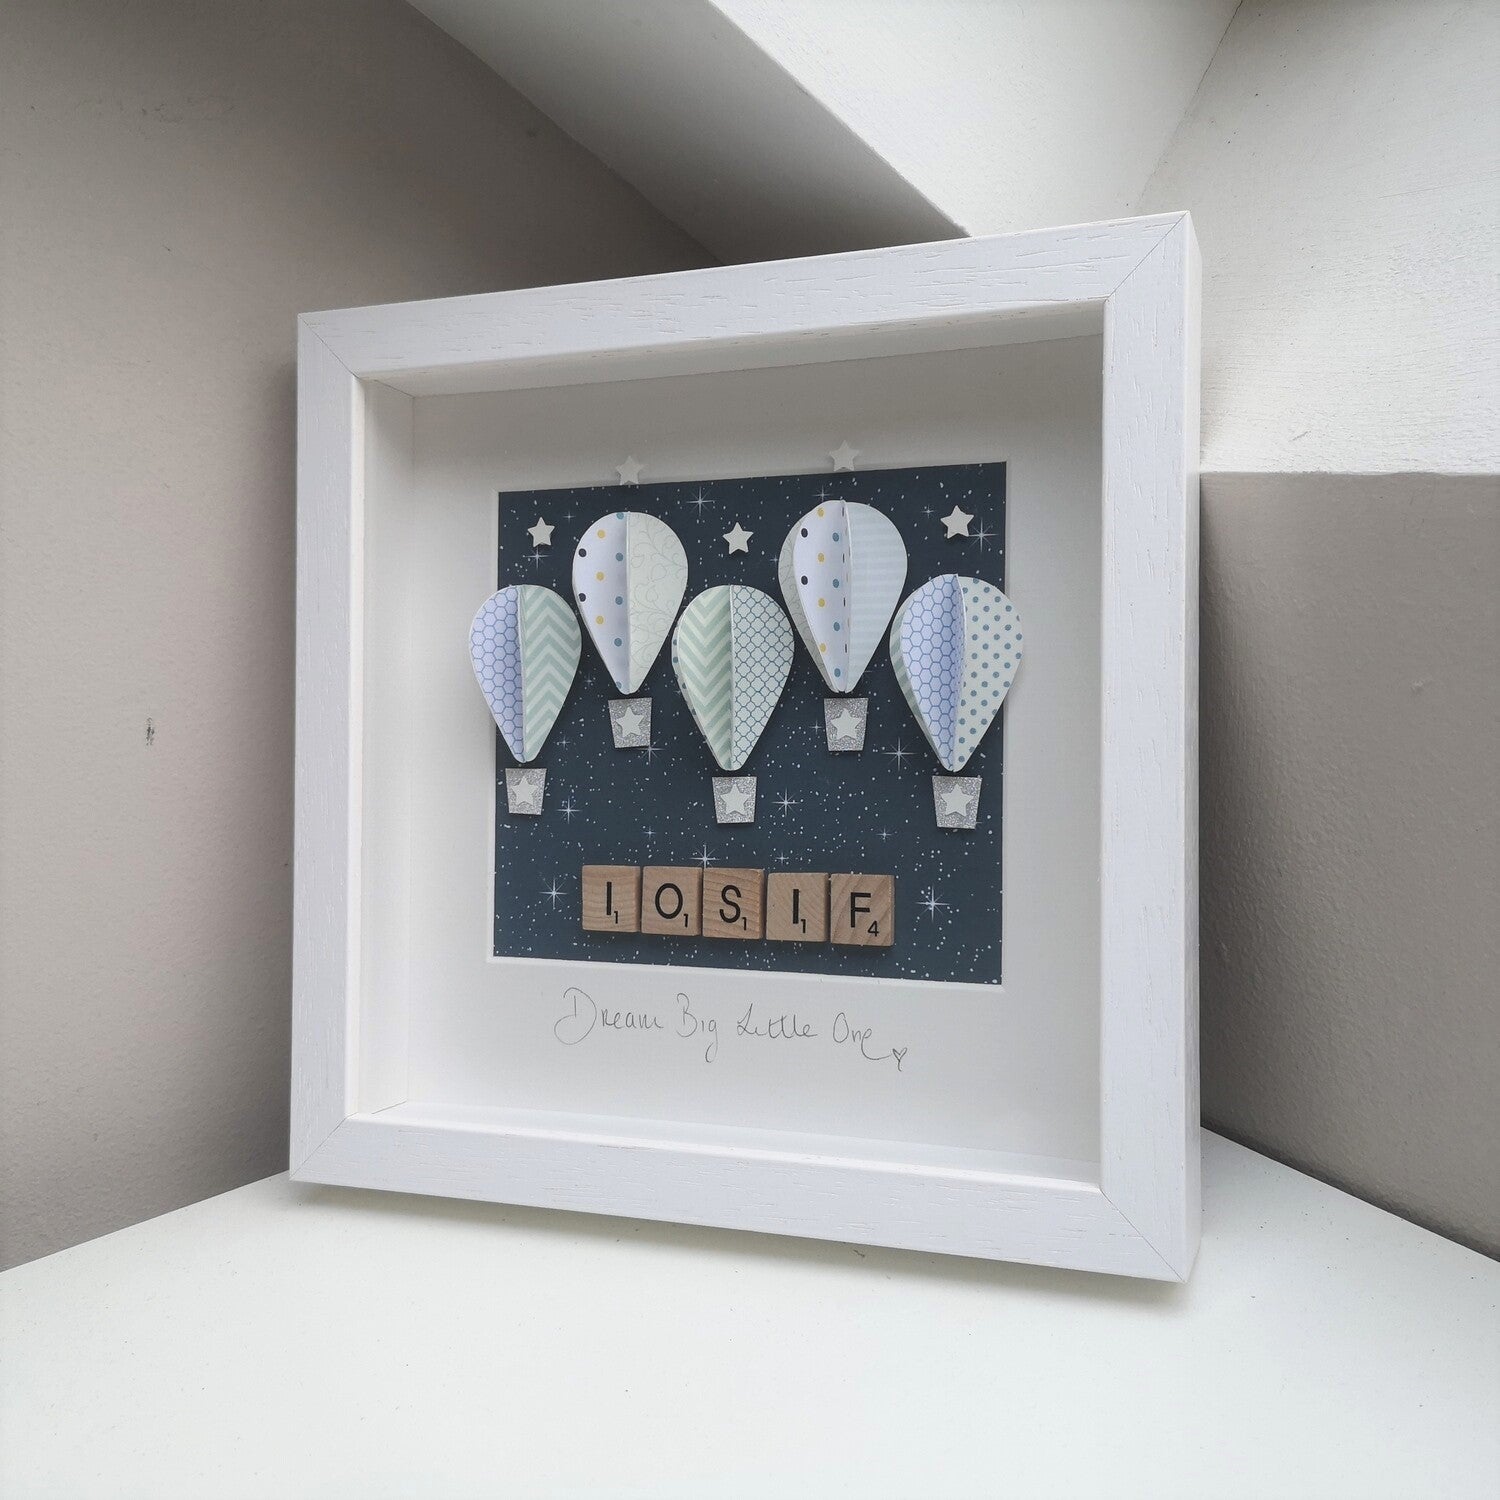 5 pastel blue patterned papercut balloons on a navy blue starry night backing, with a name in wooden scrabble tiles, in a handmade 25x25cm white deep box wooden frame.